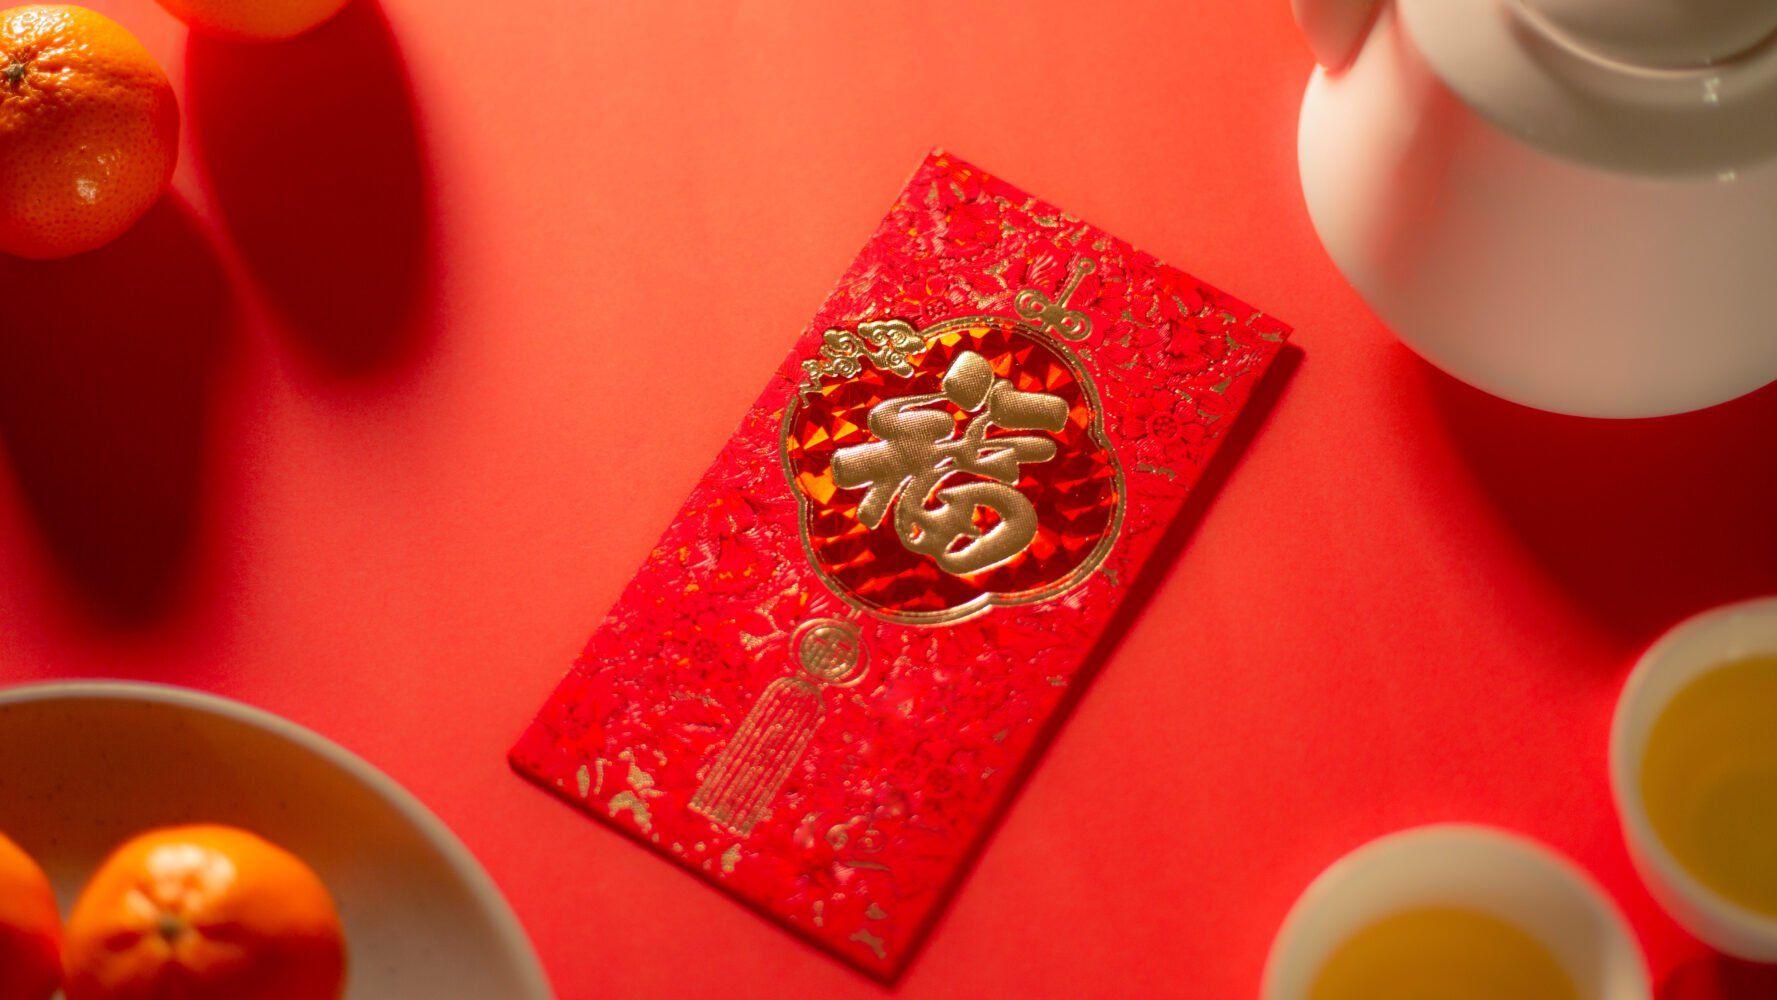 Featured image for “Playlist: Classical Chinese Music for Lunar New Year”